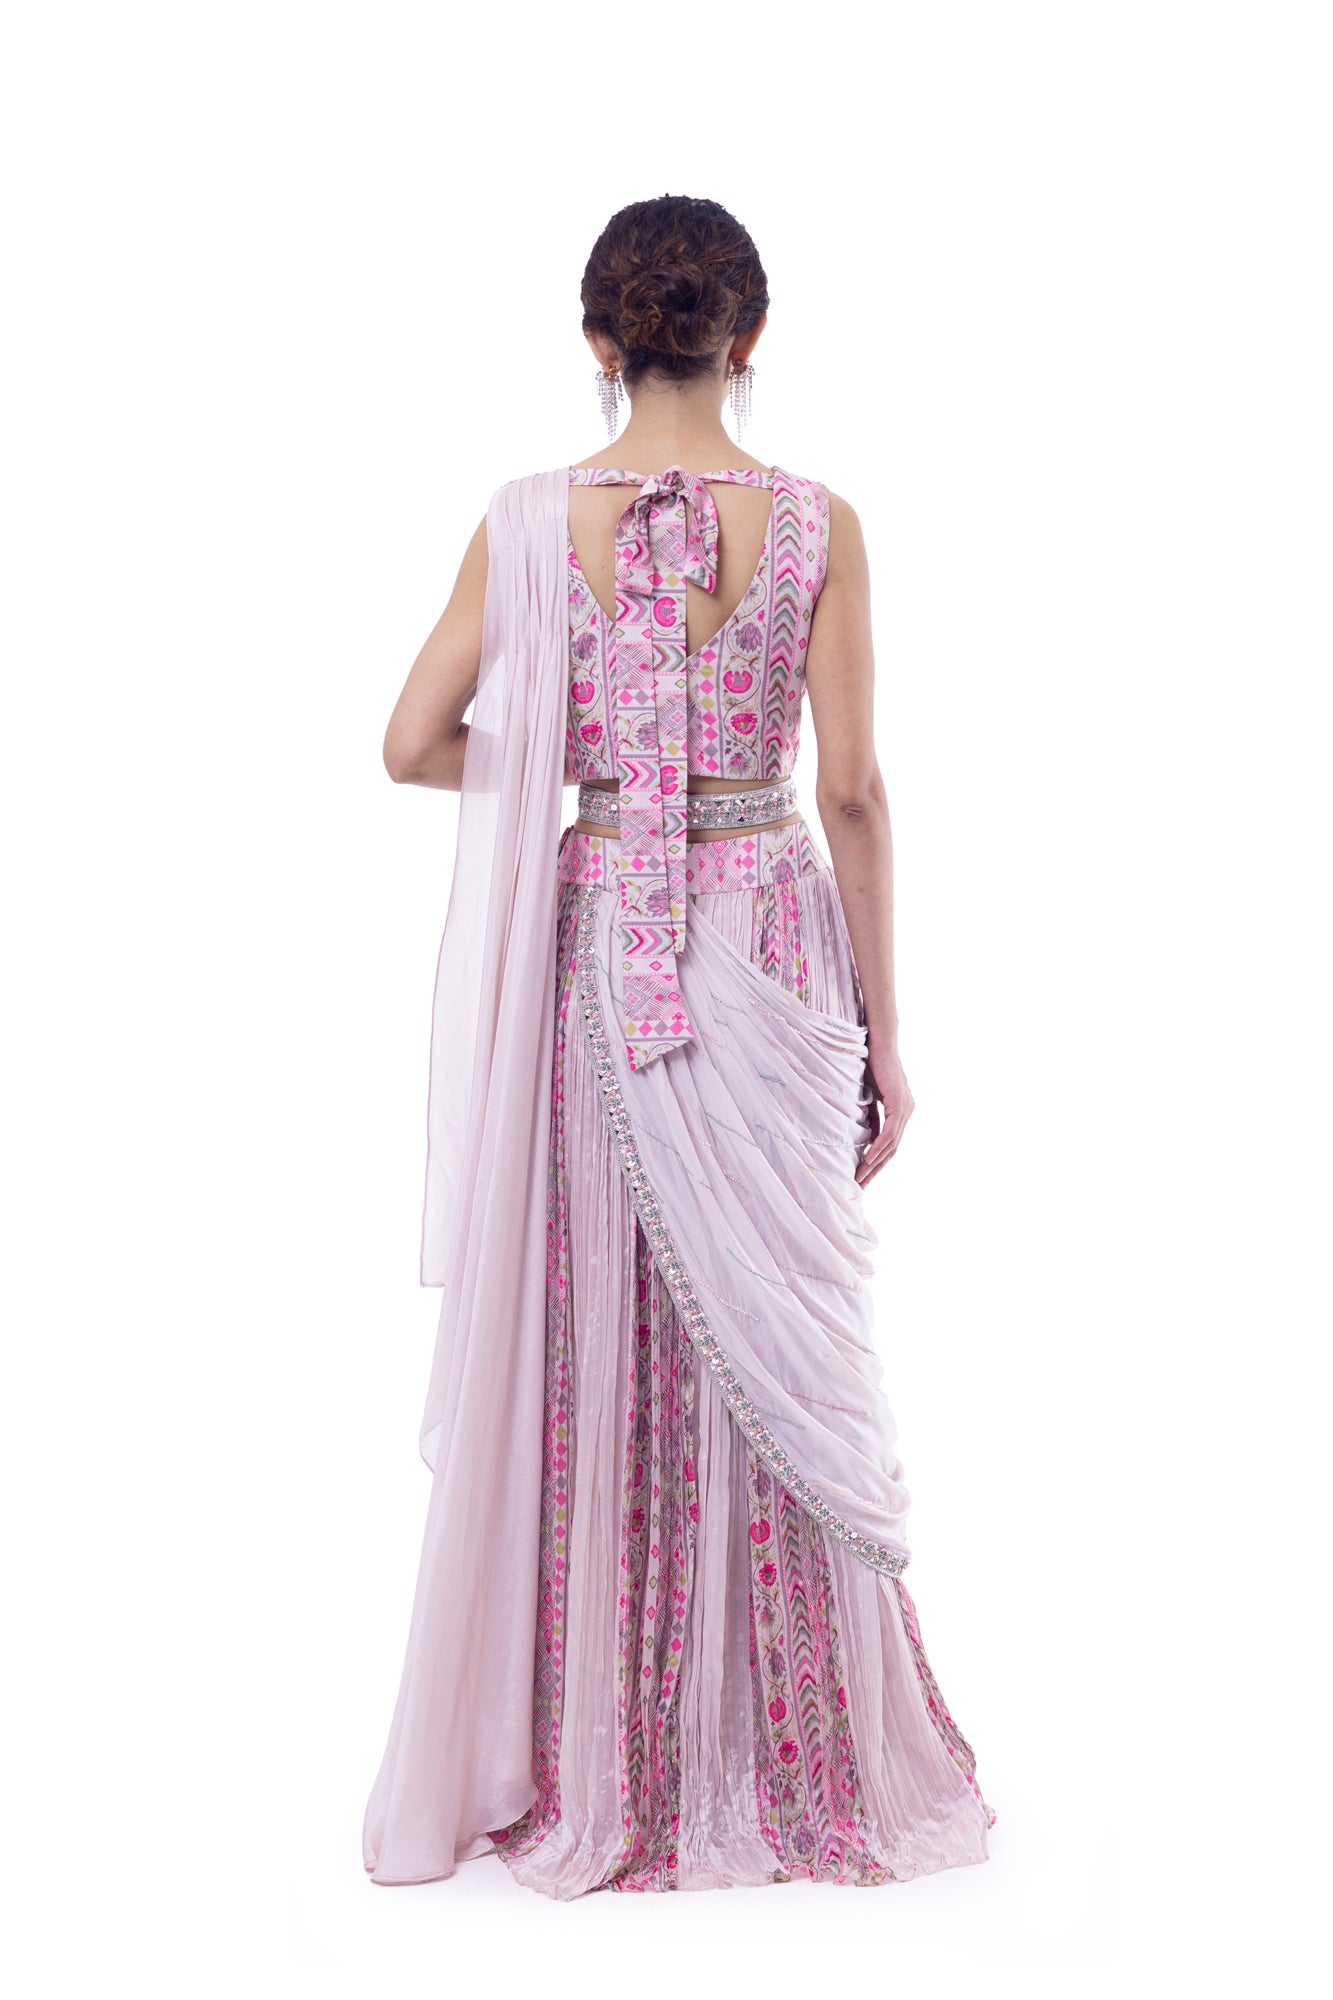 Shop light pink pre-draped chiffon saree online in USA with embellished blouse. Look your best at parties and weddings in beautiful designer sarees, embroidered sarees, handwoven sarees, silk sarees, organza saris from Pure Elegance Indian saree store in USA.-back